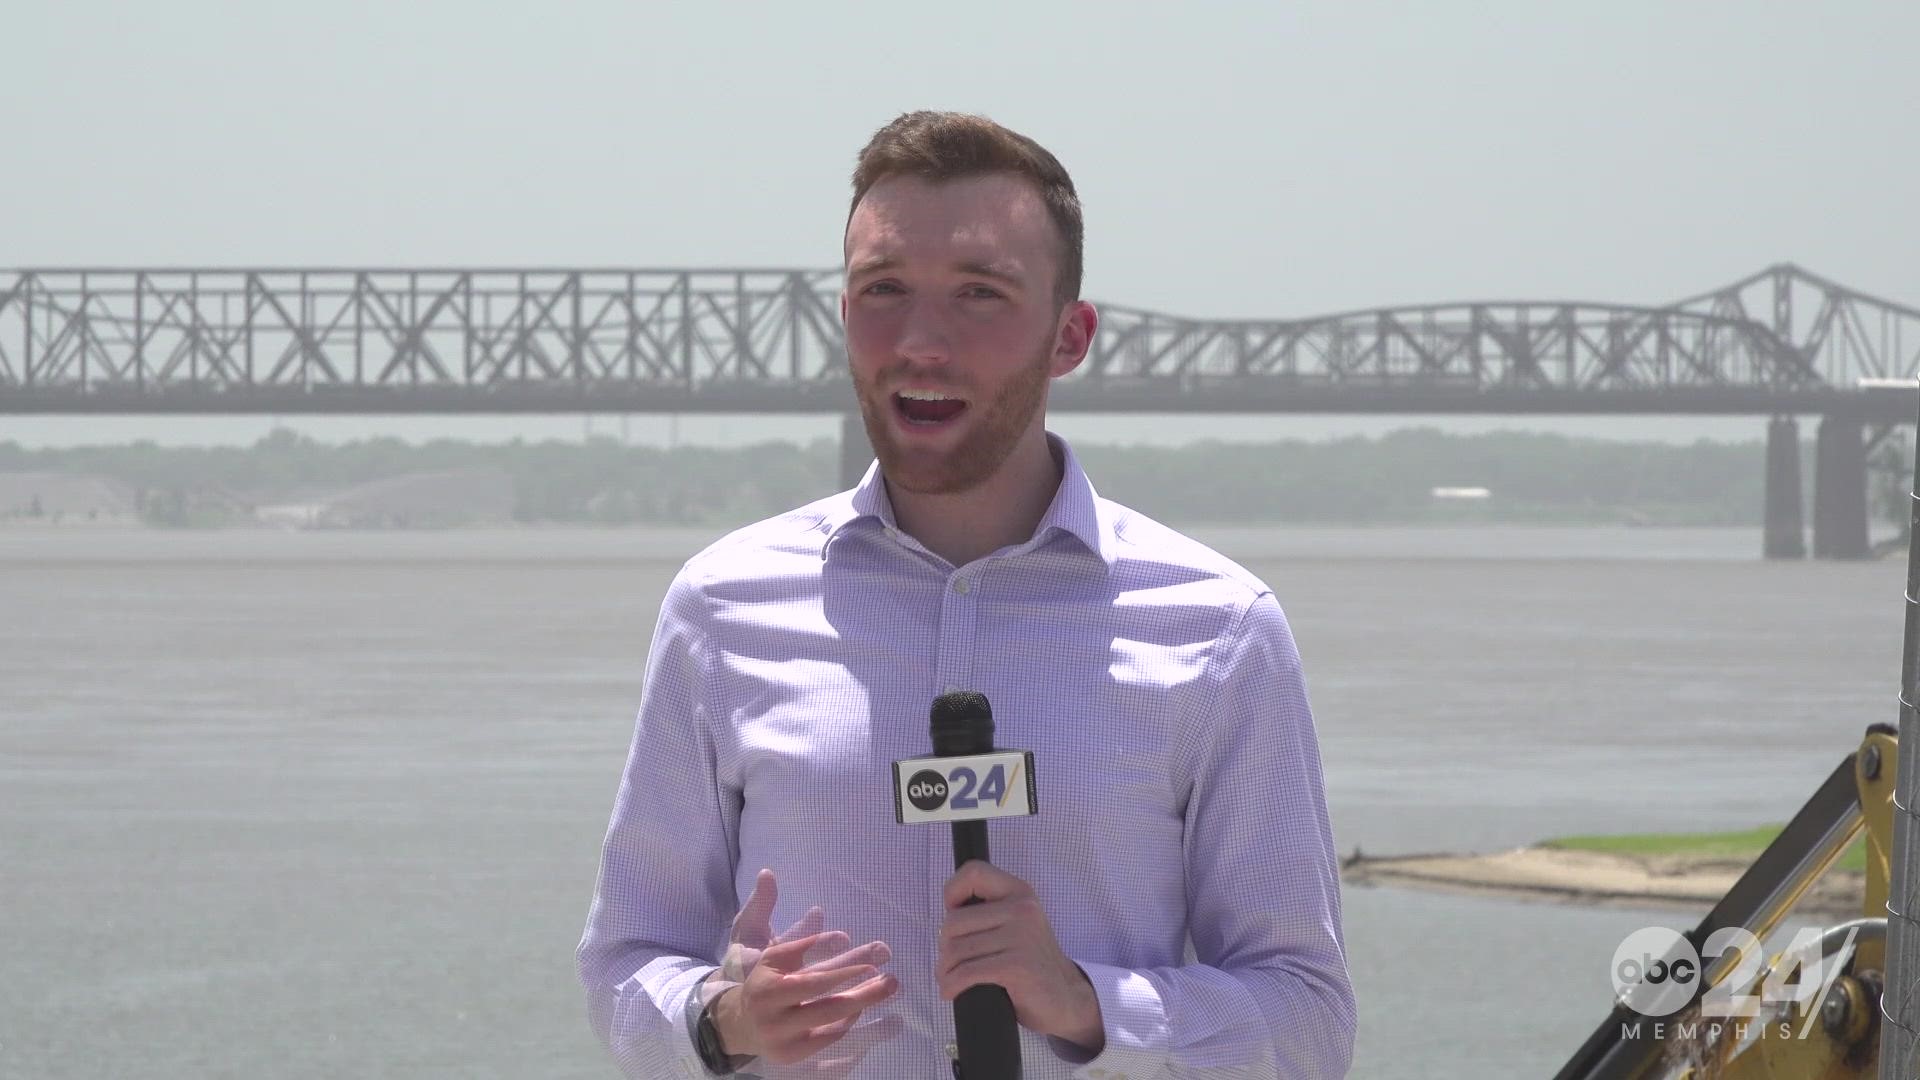 Meteorologist Trevor Birchett explains why the sky has been so hazy in the Southeastern United States for the last few days.